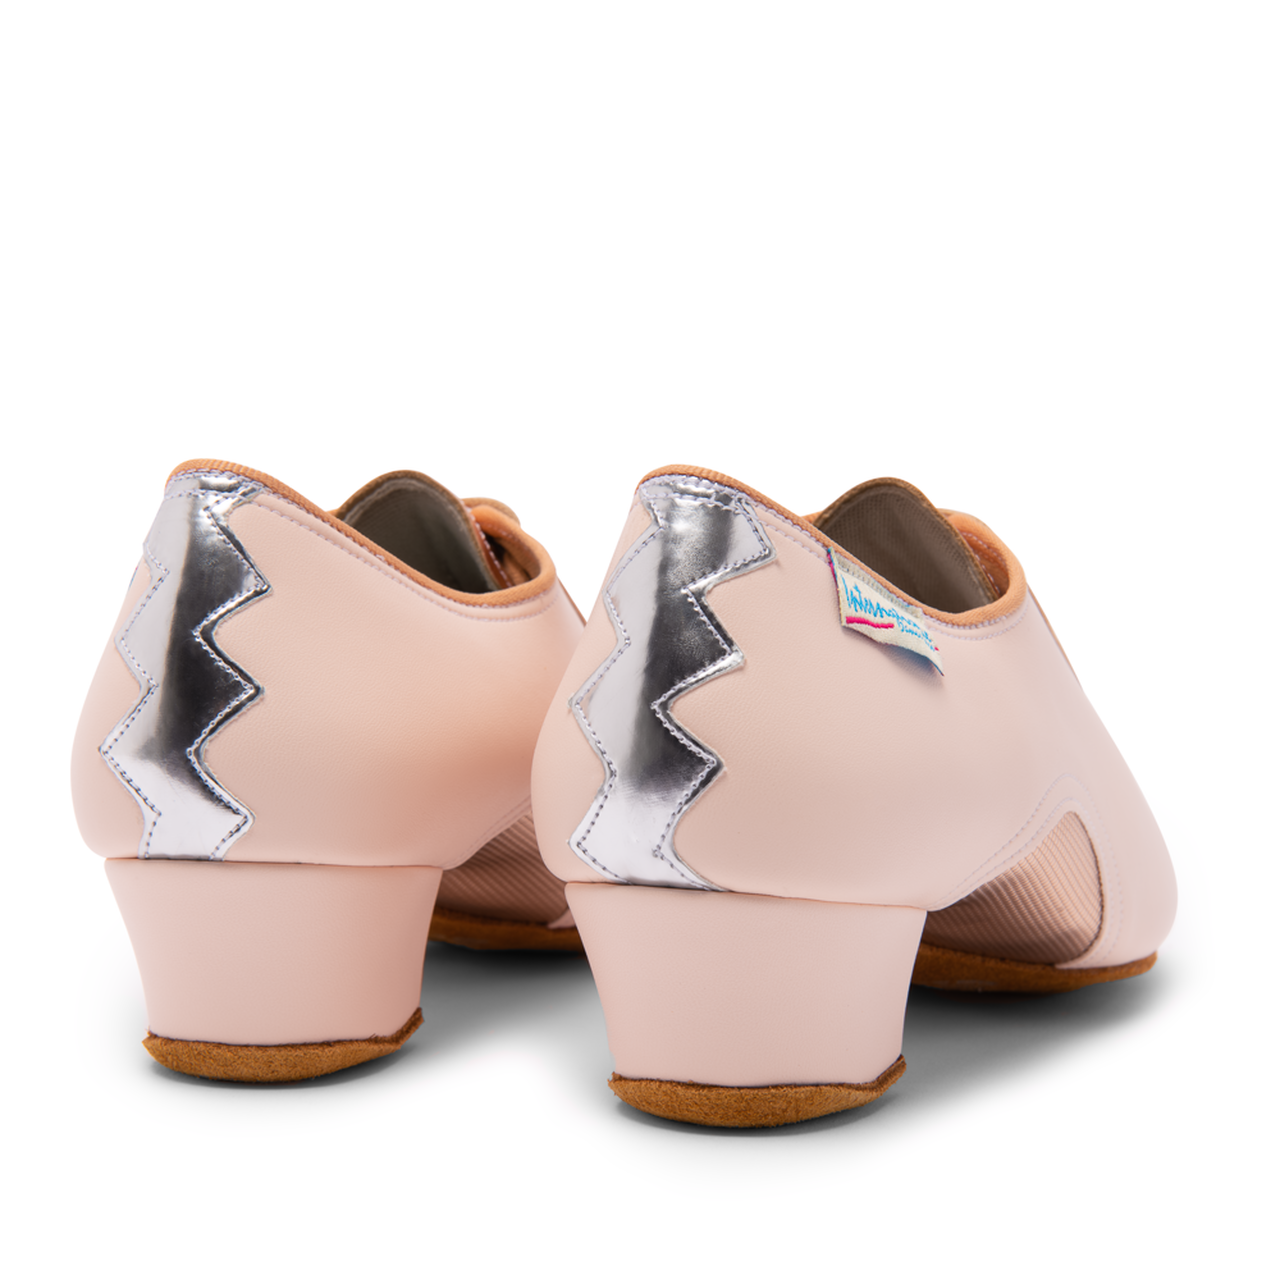 International Dance Shoes IDS Artiste SS_SALE Himalayan Rose Teaching/Practice Shoe with Metallic Rose Gold Accents